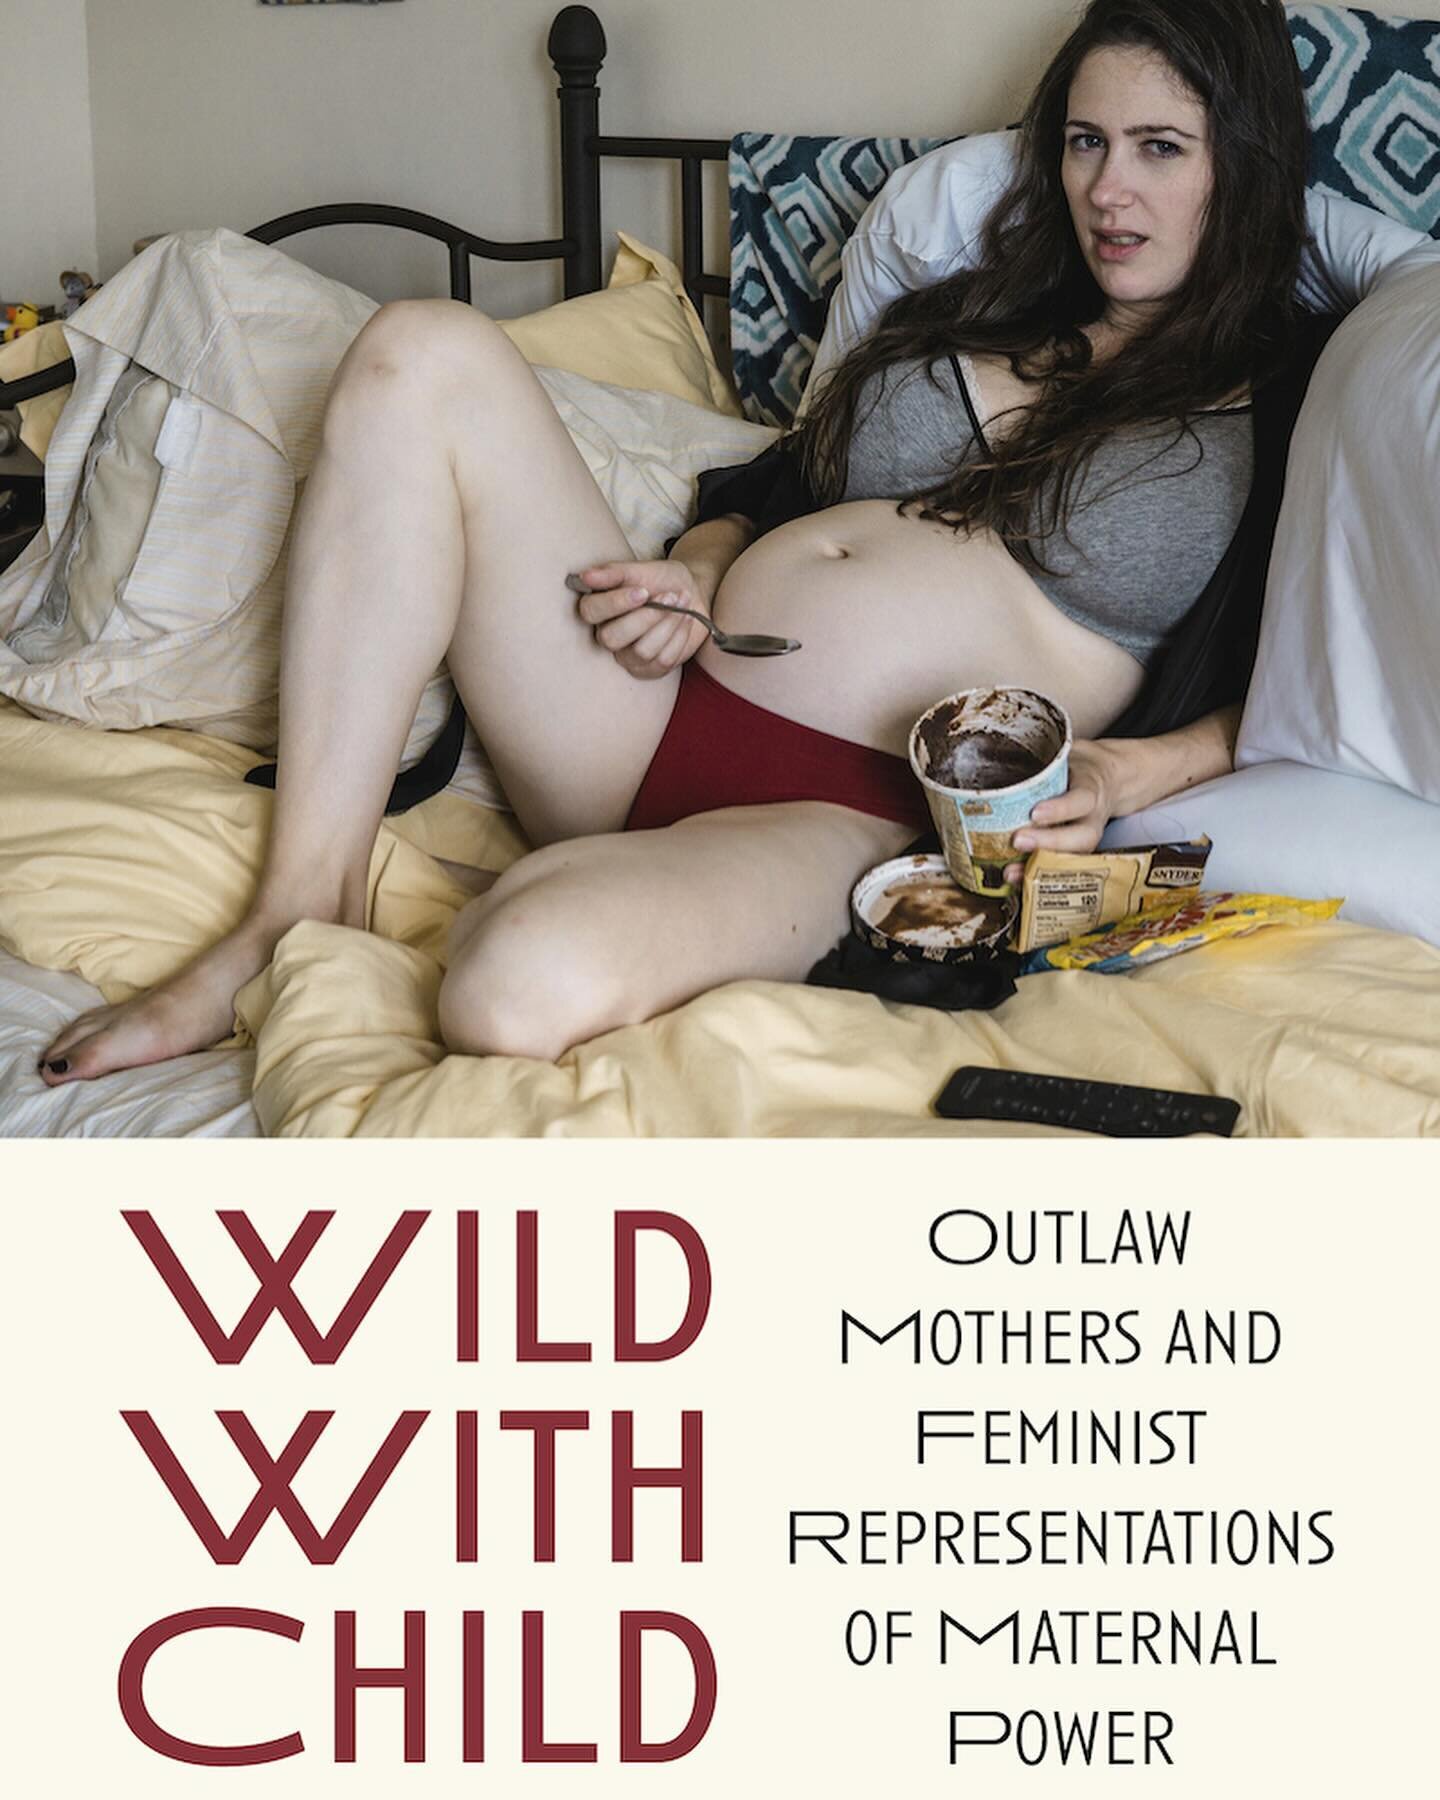 Pleased to have contributed to Demeter Press&rsquo; latest publication &lsquo;Wild With Child: Outlaw Mothers and Feminist Representations of Maternal Power&rsquo;, Eds Rebecca Bromwich and Elana Finestone.

My artwork &lsquo;The Creation of the Worl